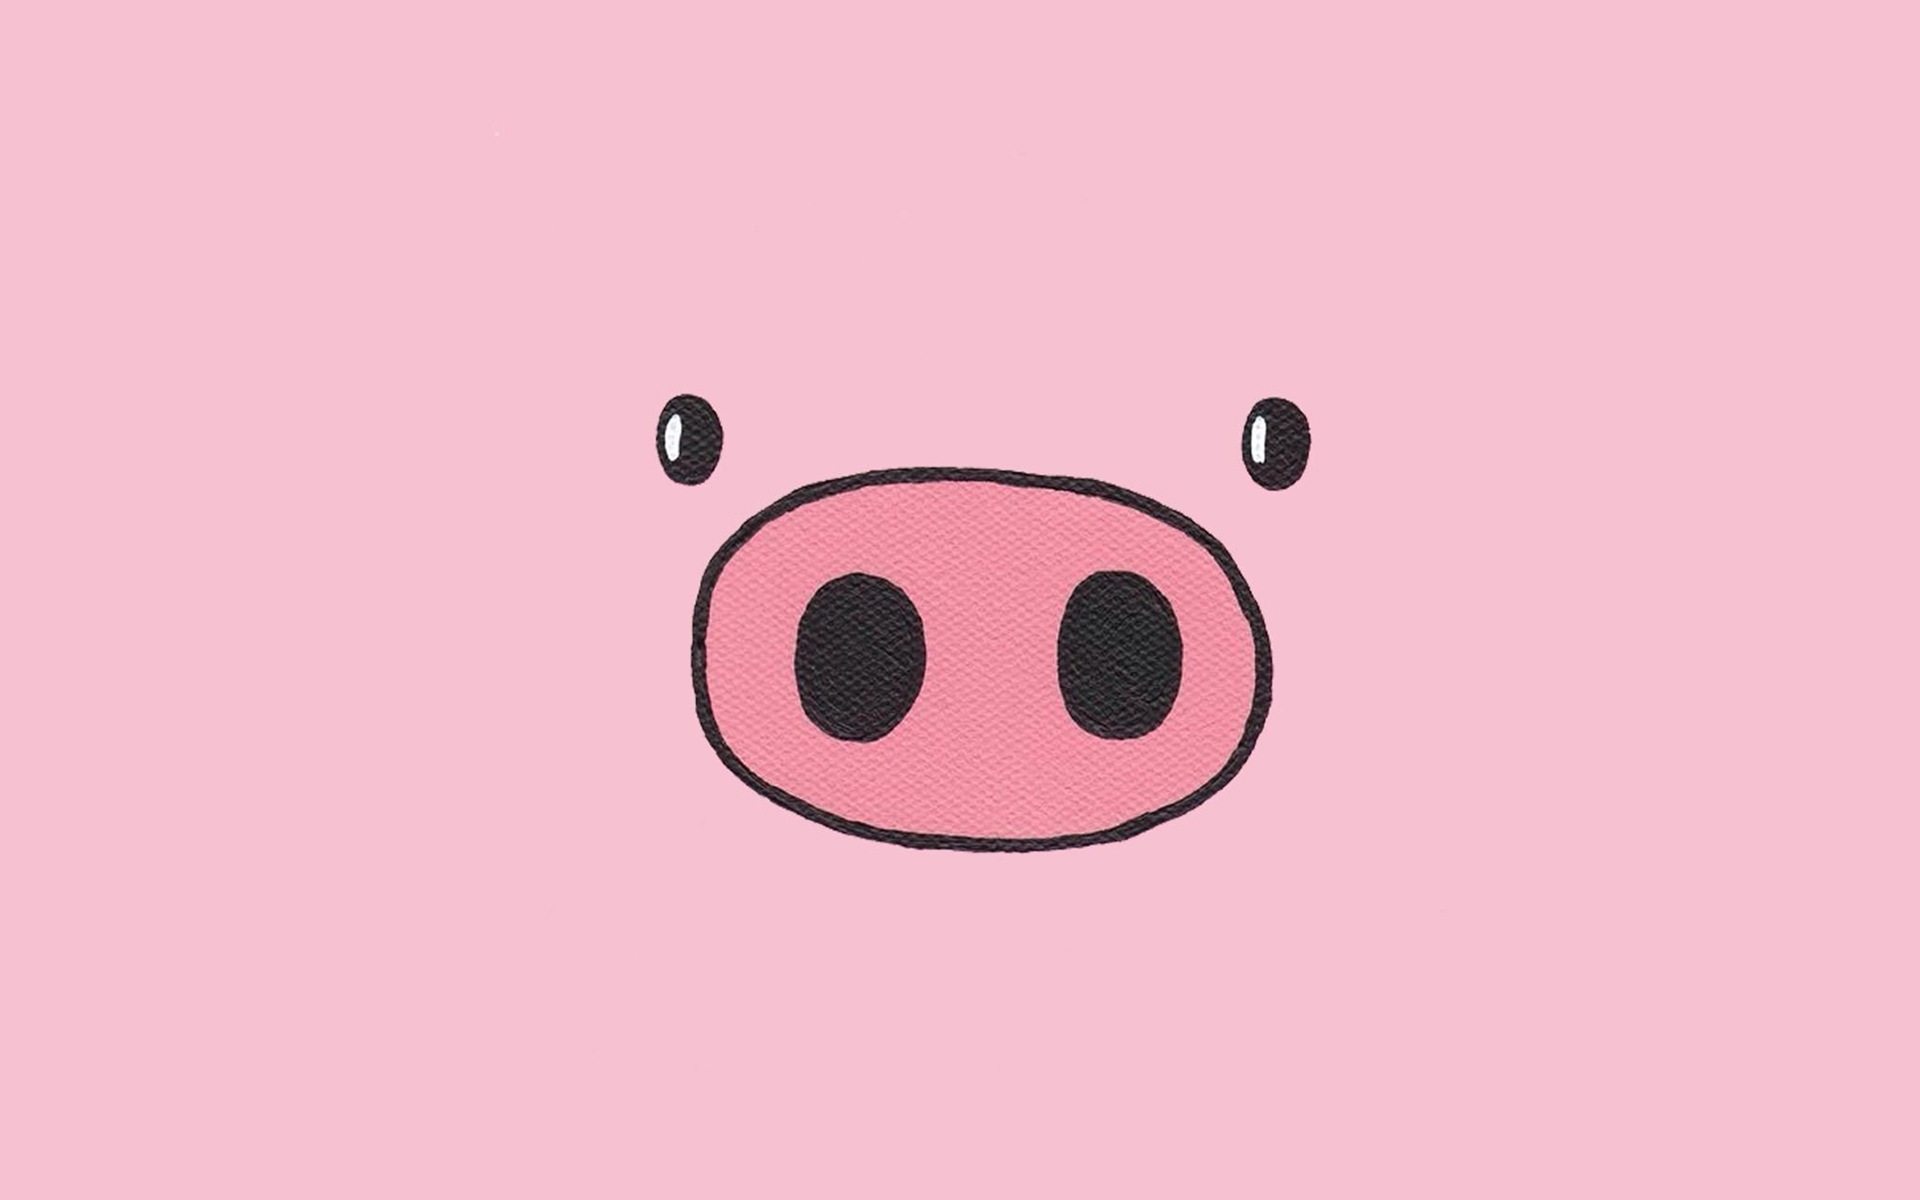 Pig Wallpapers